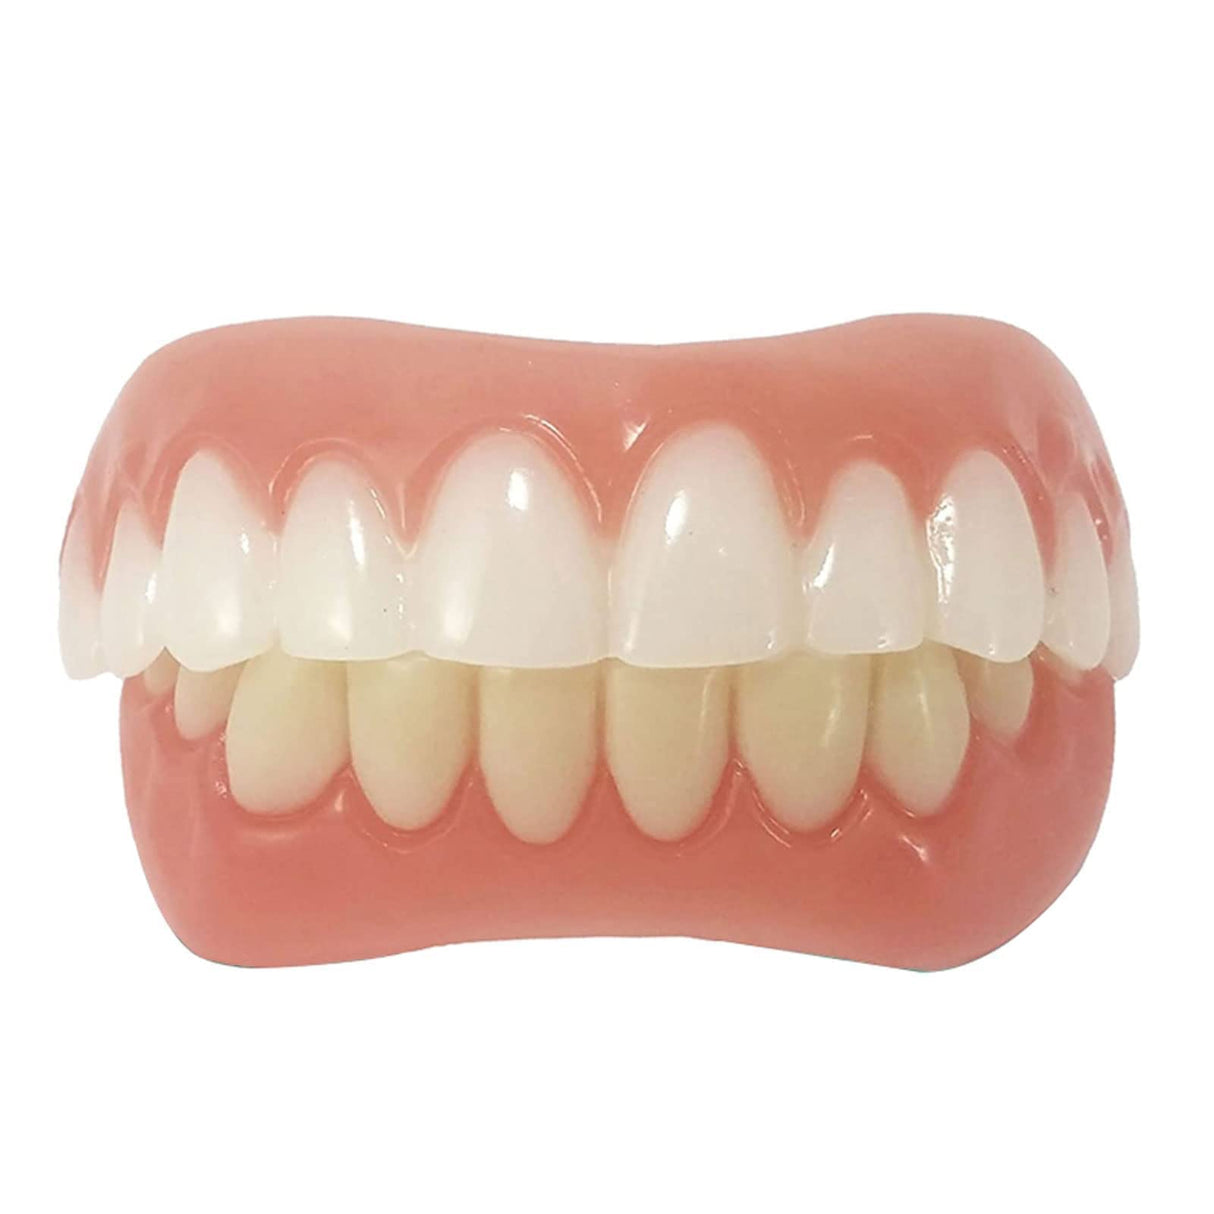 Upper and Lower Veneer, Dentures for Women and Men, Fake Teeth, Natural Shade! Fix Your Smile at Home within Minutes!